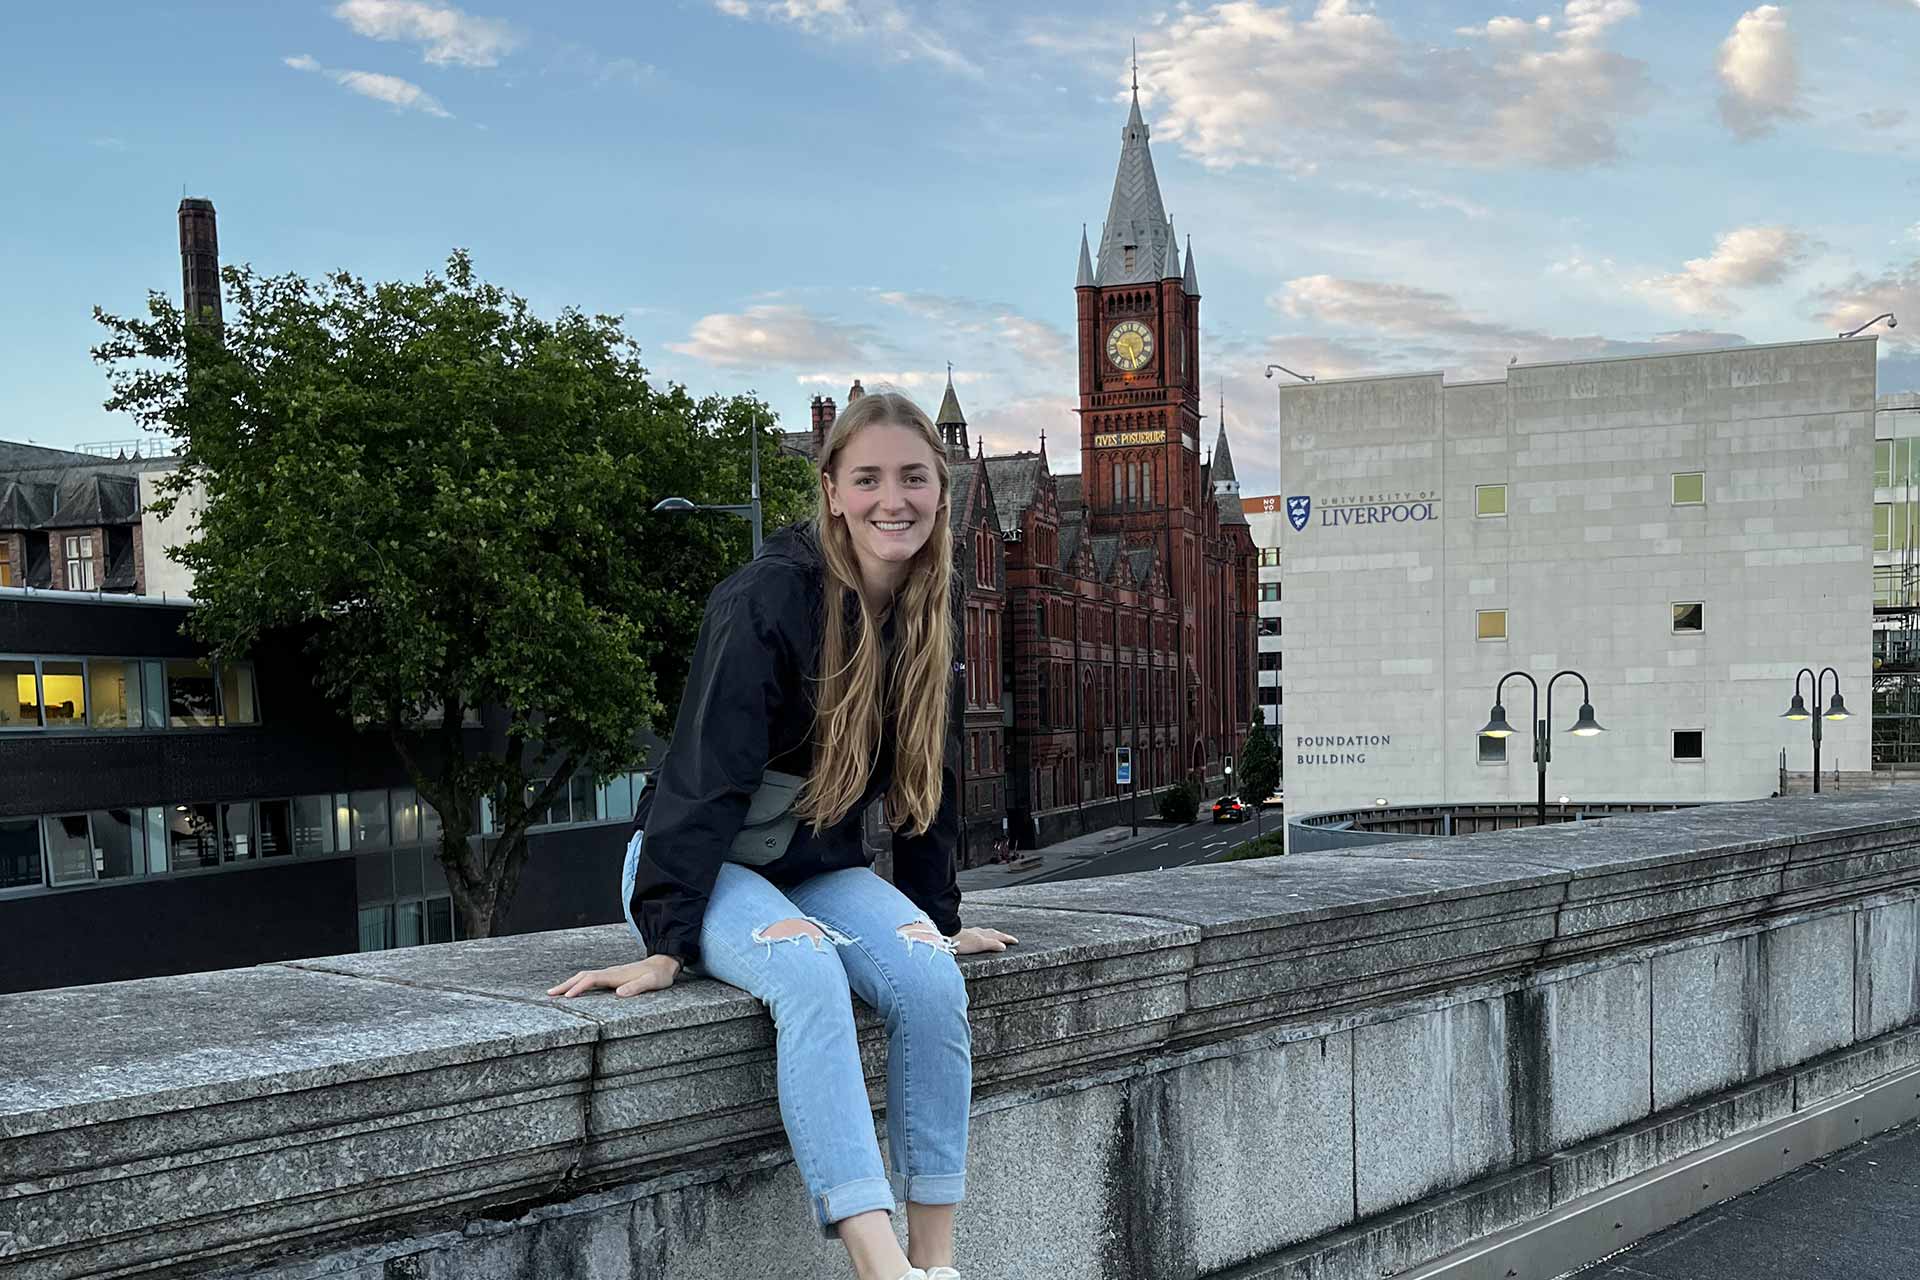 An International summer School student poses on a rooftop in front of the Victoria Gallery and Museum